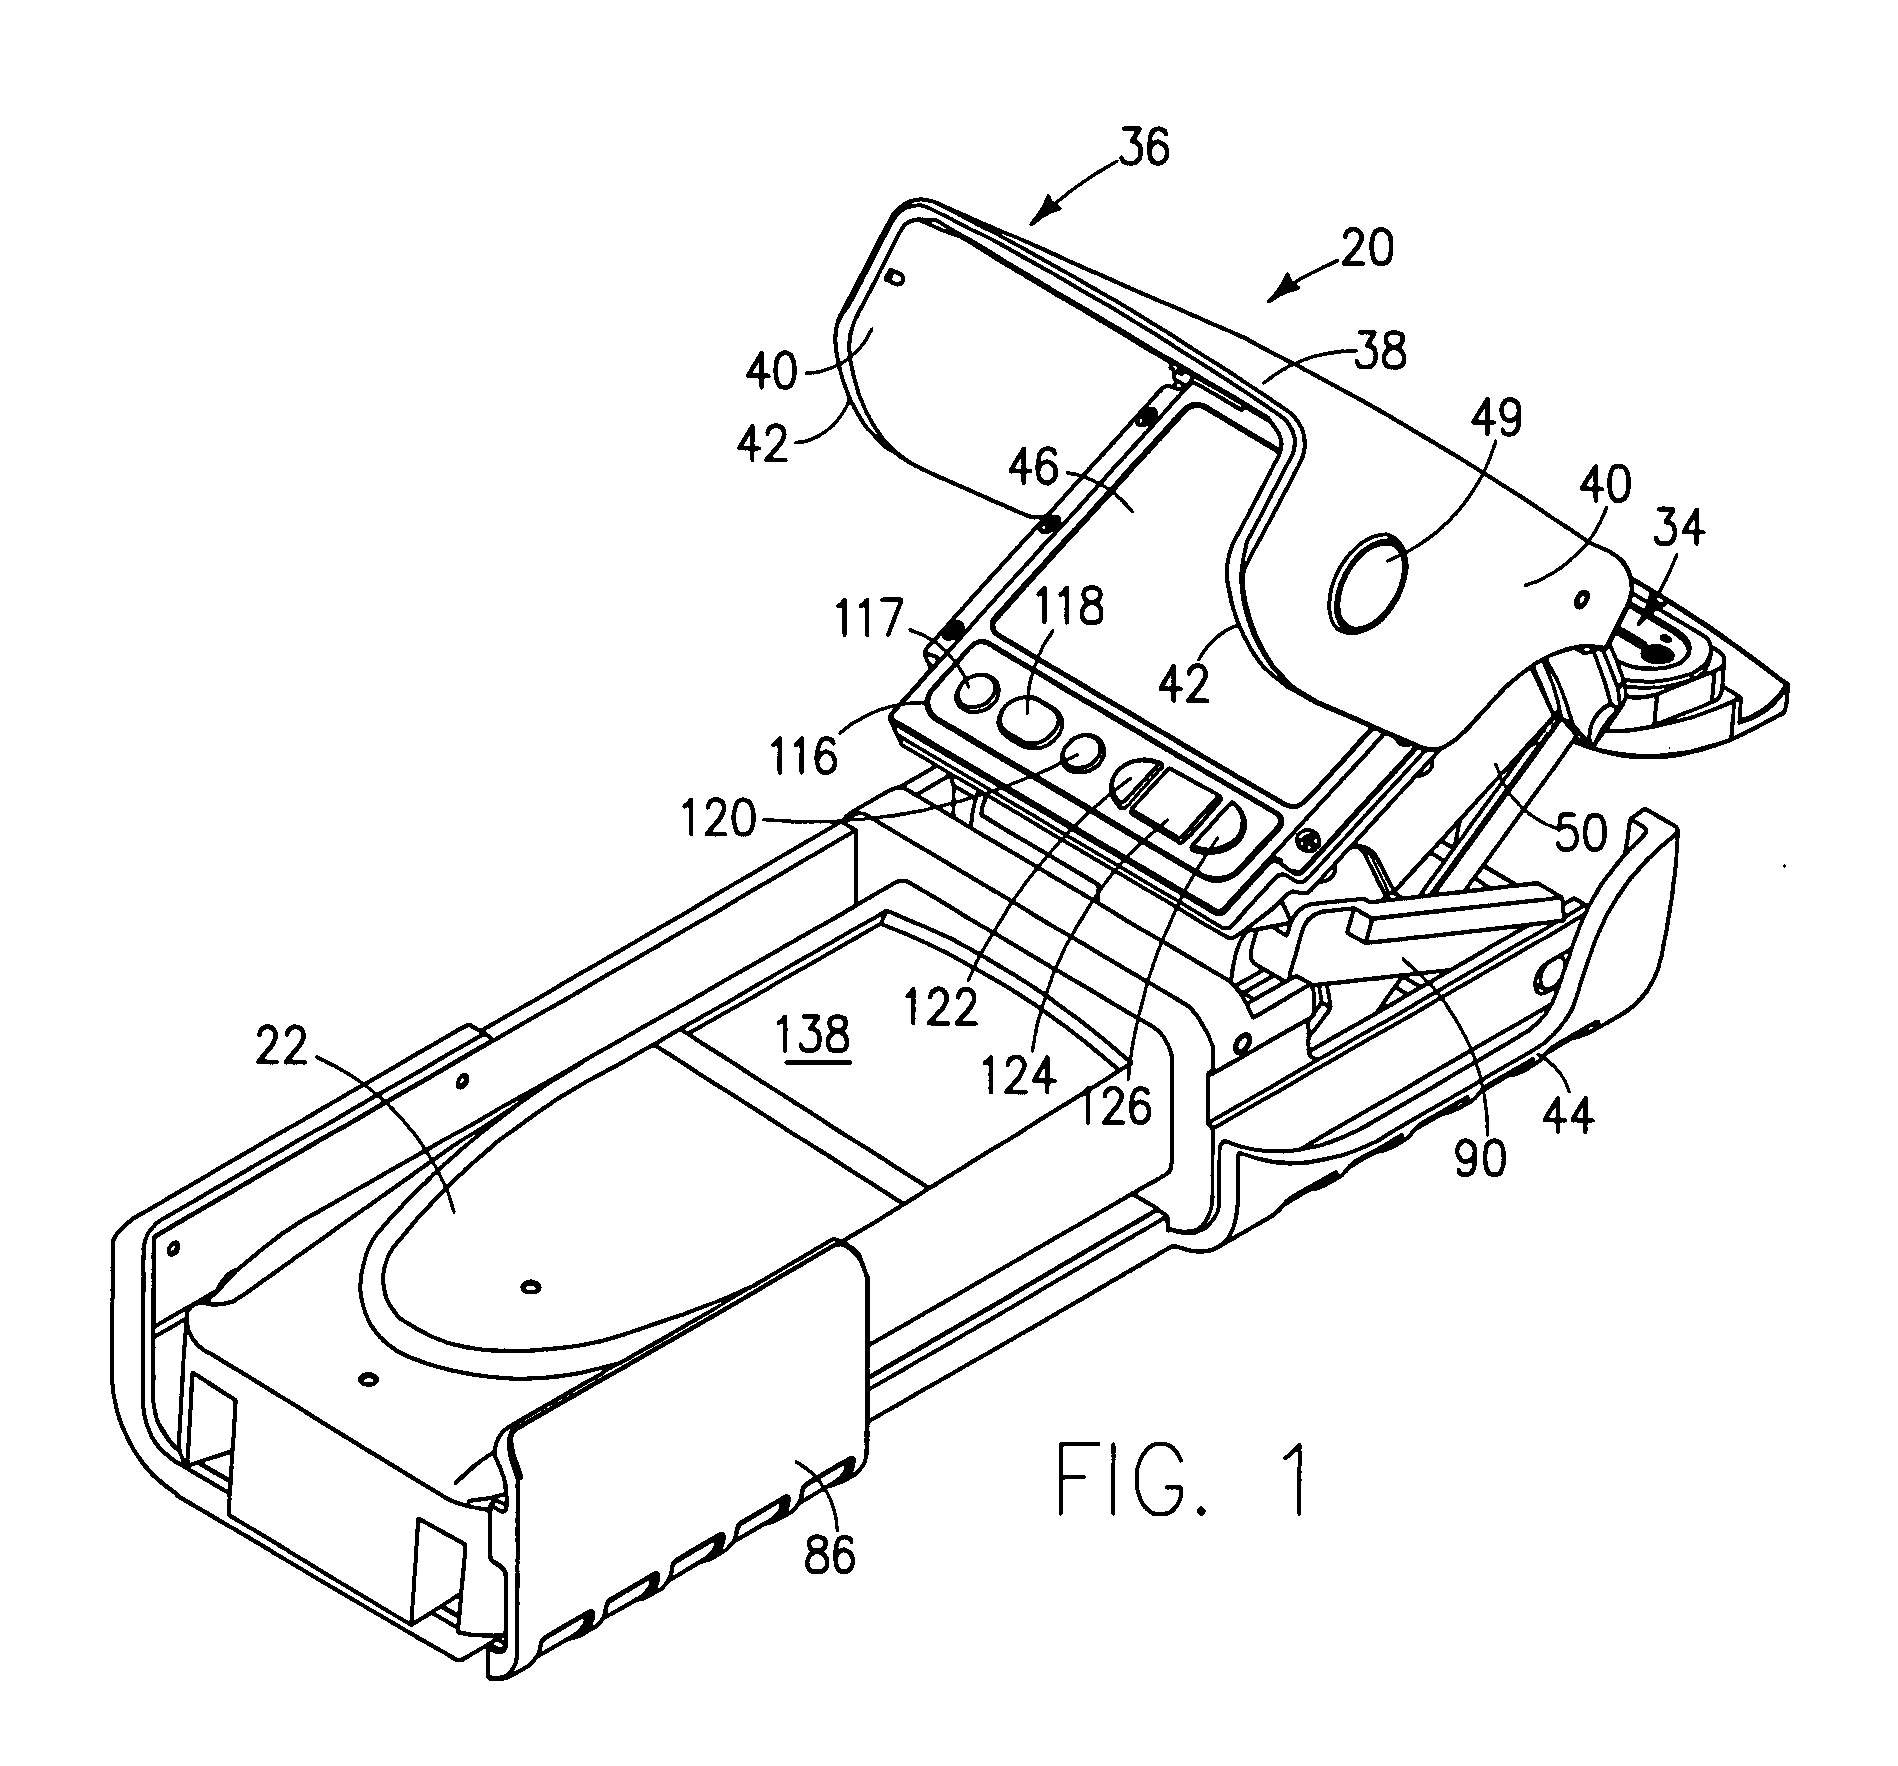 Method and apparatus for locating and measuring the distance to a target